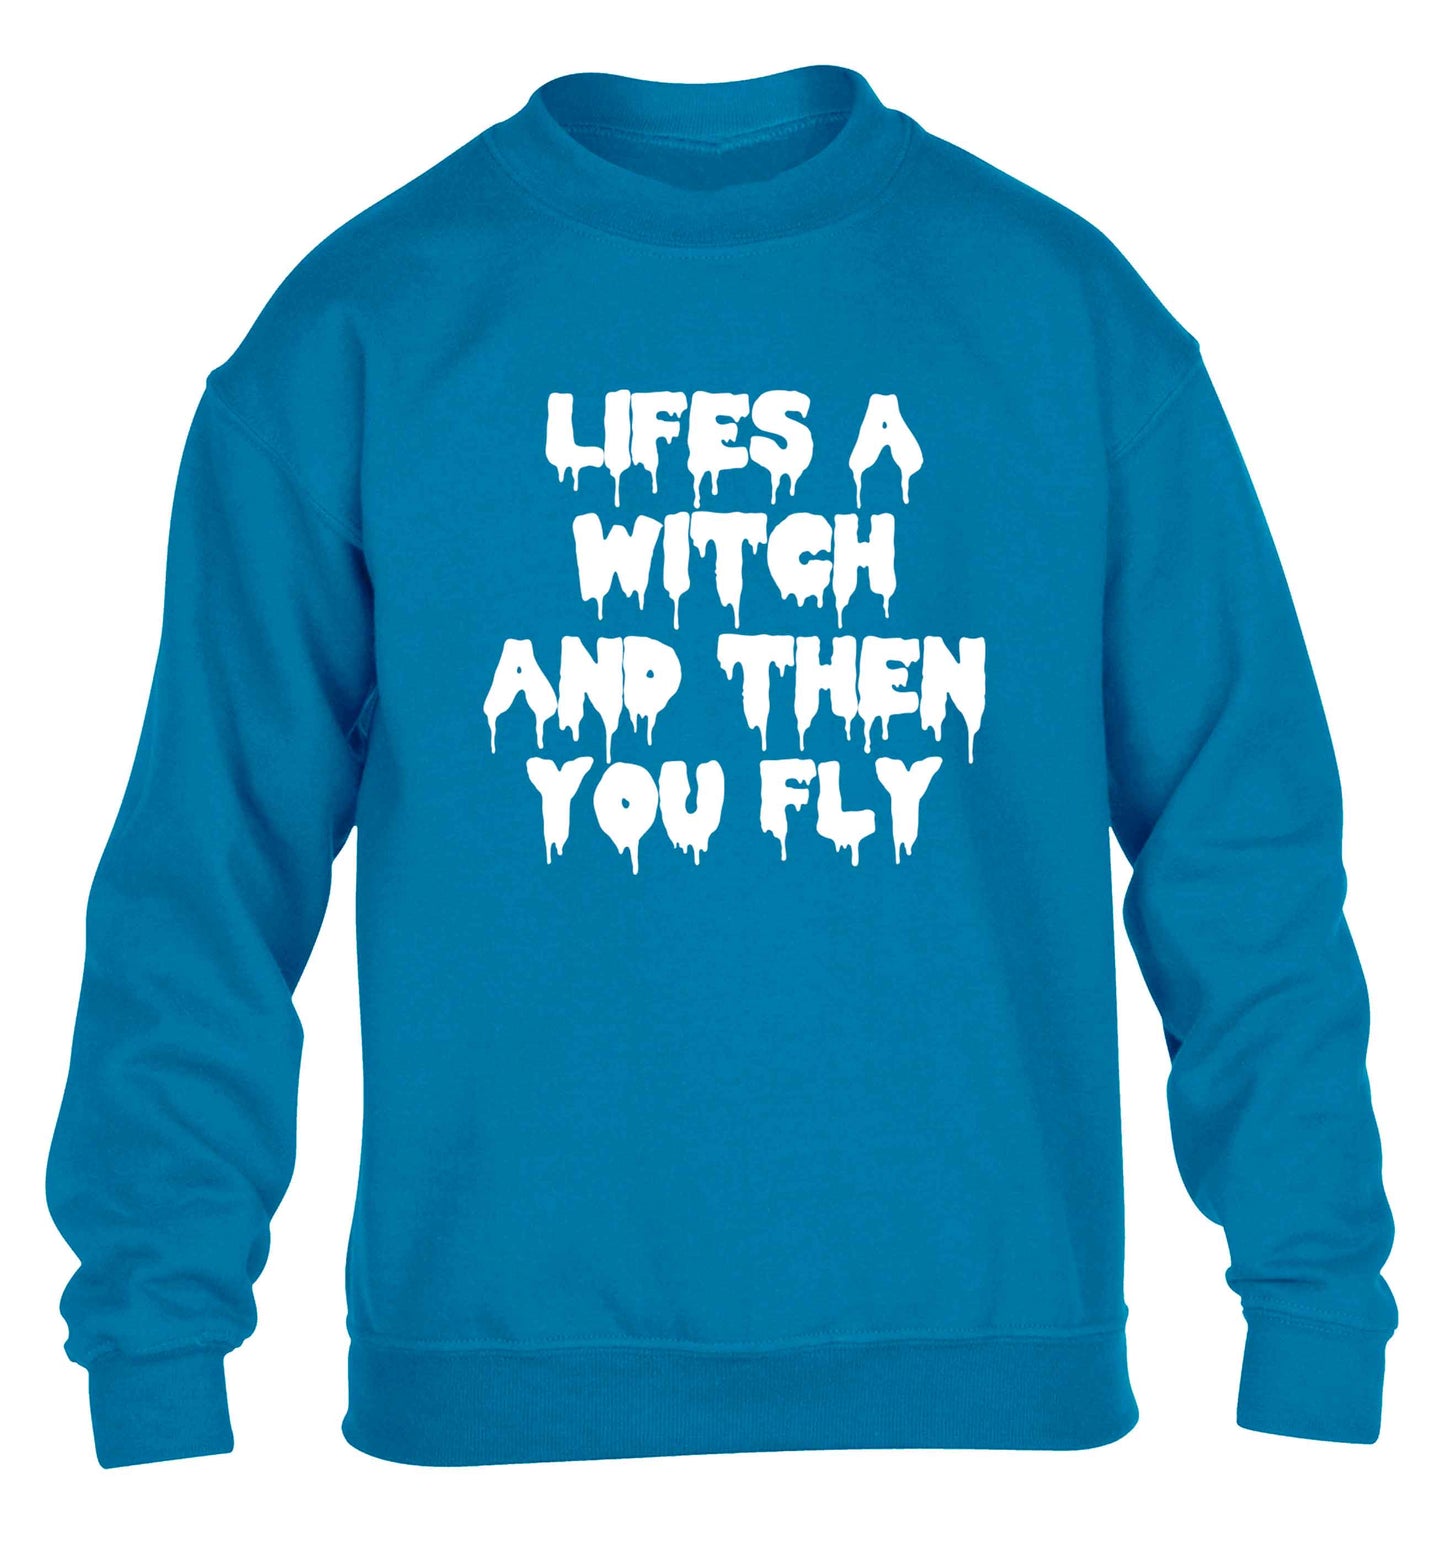 Life's a witch and then you fly children's blue sweater 12-13 Years